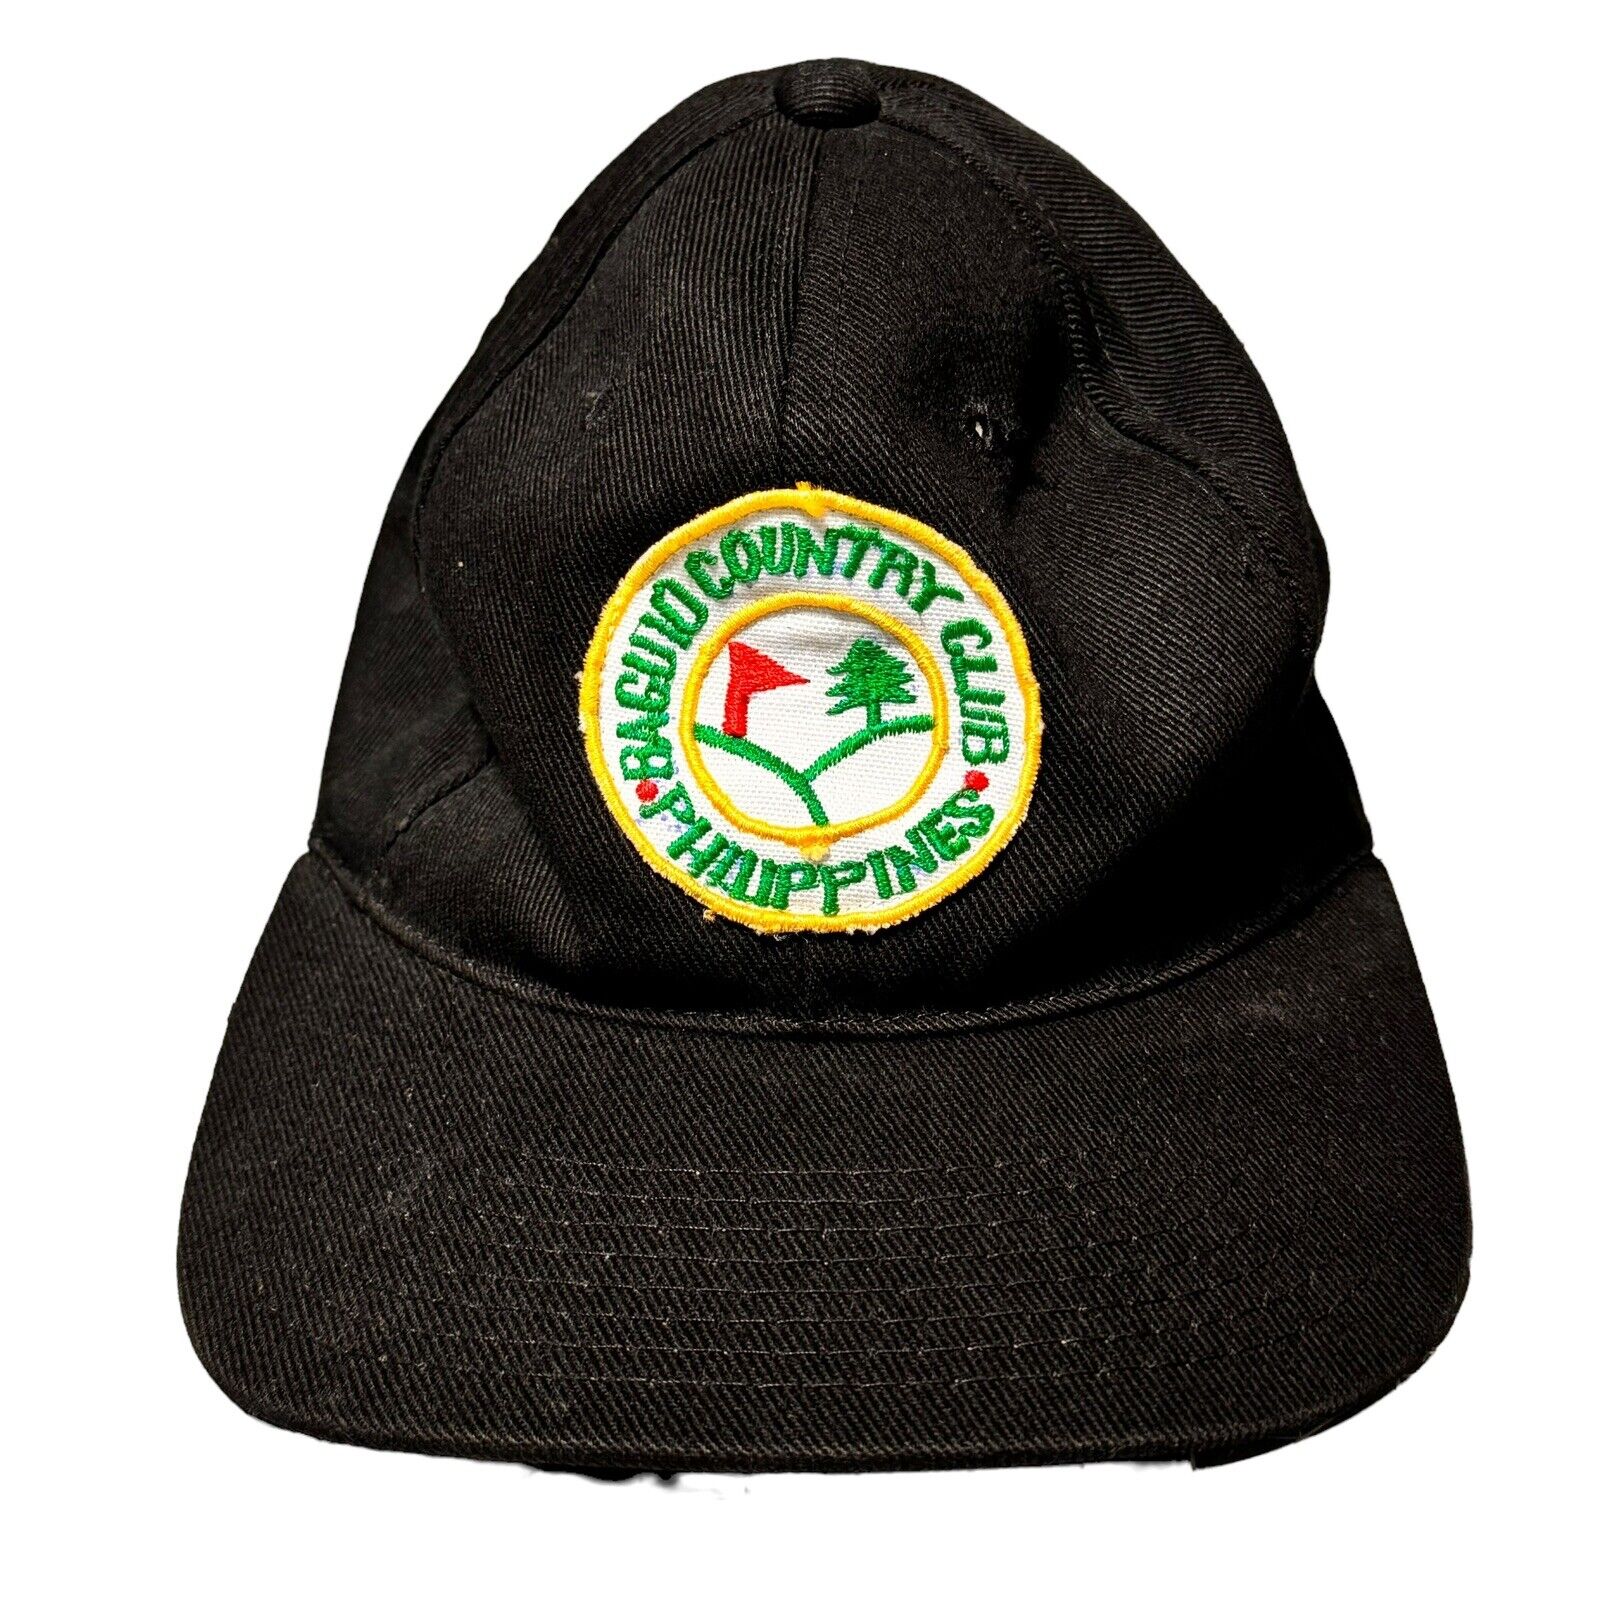 BAGUIO COUNTRY CLUB Vintage Patch Hat PHILIPPINES Golf Resort